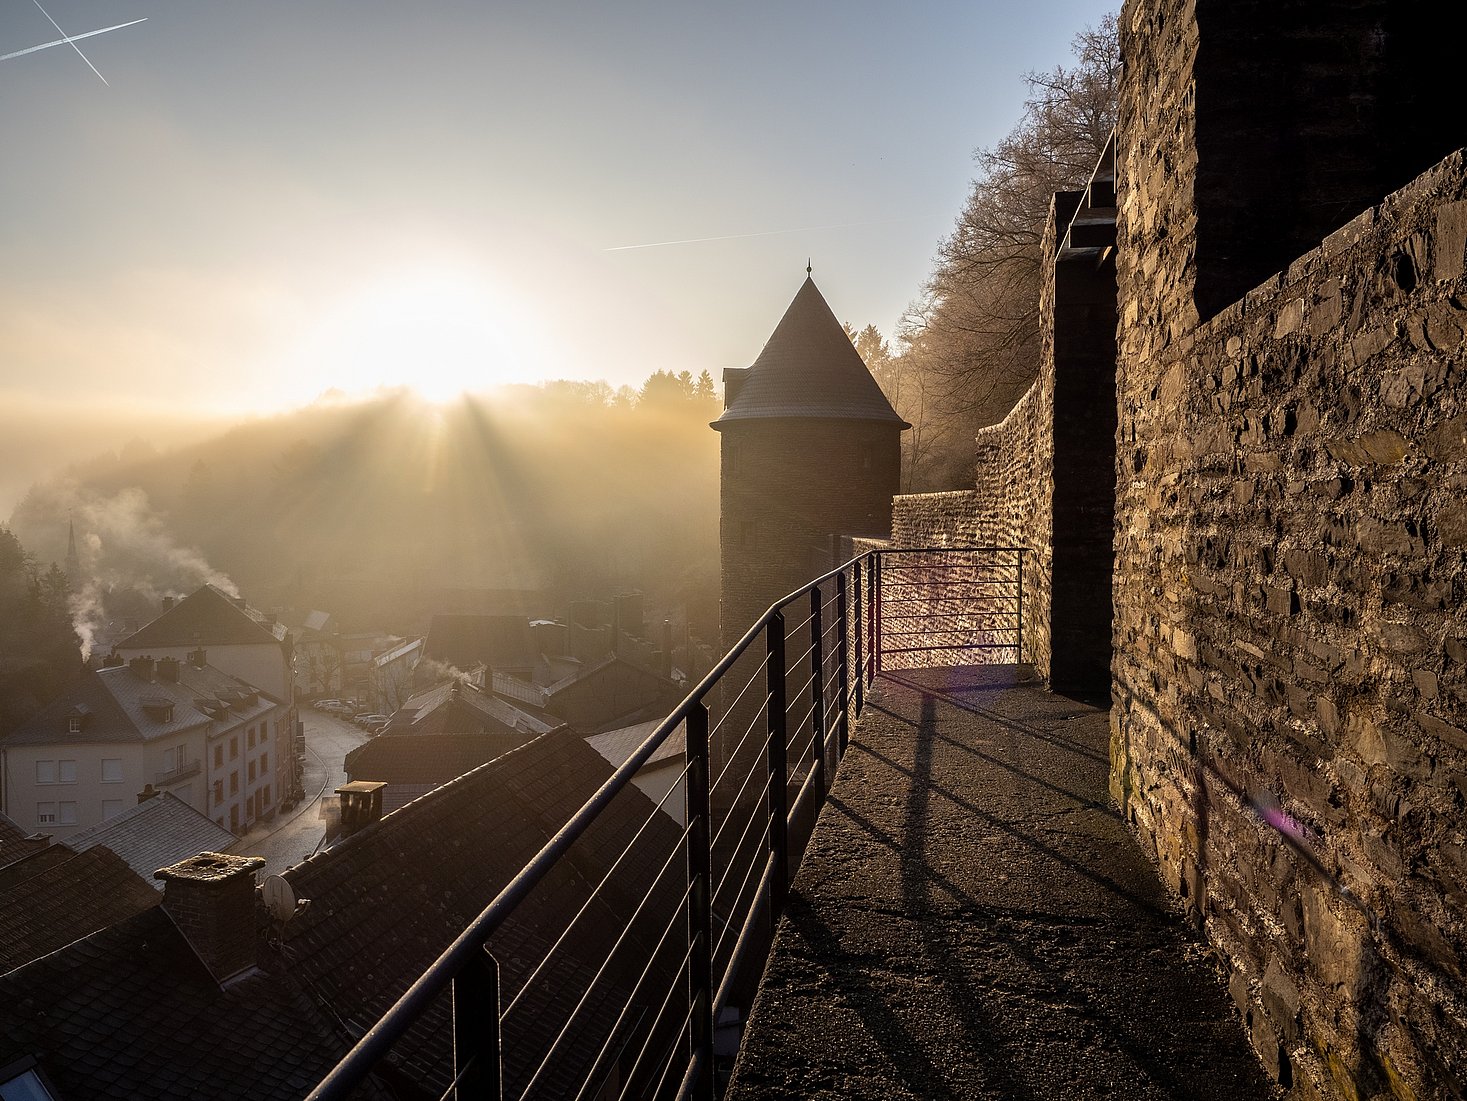 A photo taken at a fortress wall, with the sunrise casting light over the castle and highlighting the small tower against the blue sky.